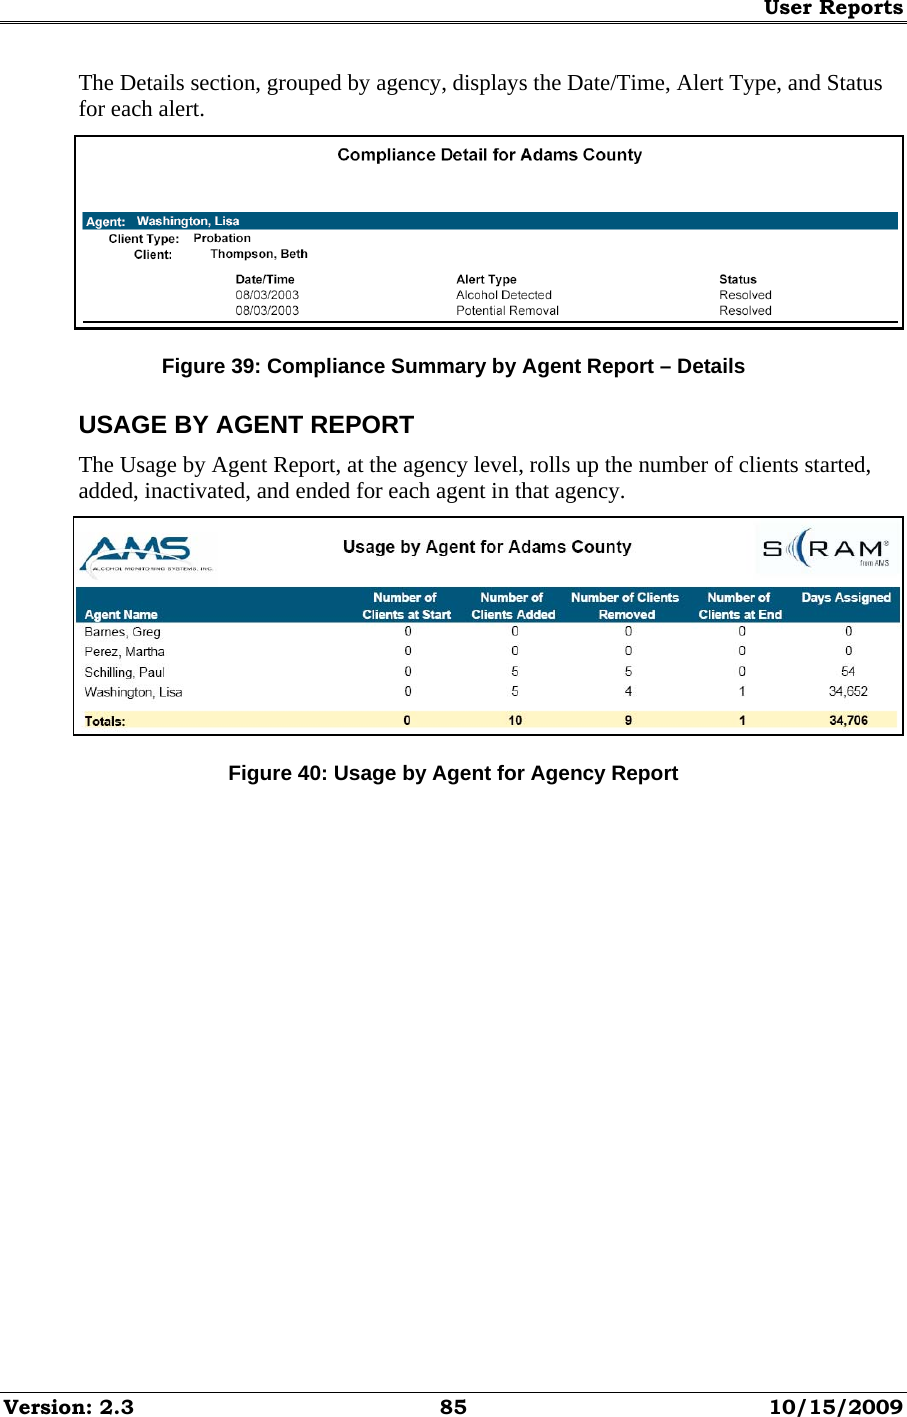 User Reports Version: 2.3  85  10/15/2009 The Details section, grouped by agency, displays the Date/Time, Alert Type, and Status for each alert.  Figure 39: Compliance Summary by Agent Report – Details USAGE BY AGENT REPORT The Usage by Agent Report, at the agency level, rolls up the number of clients started, added, inactivated, and ended for each agent in that agency.  Figure 40: Usage by Agent for Agency Report 